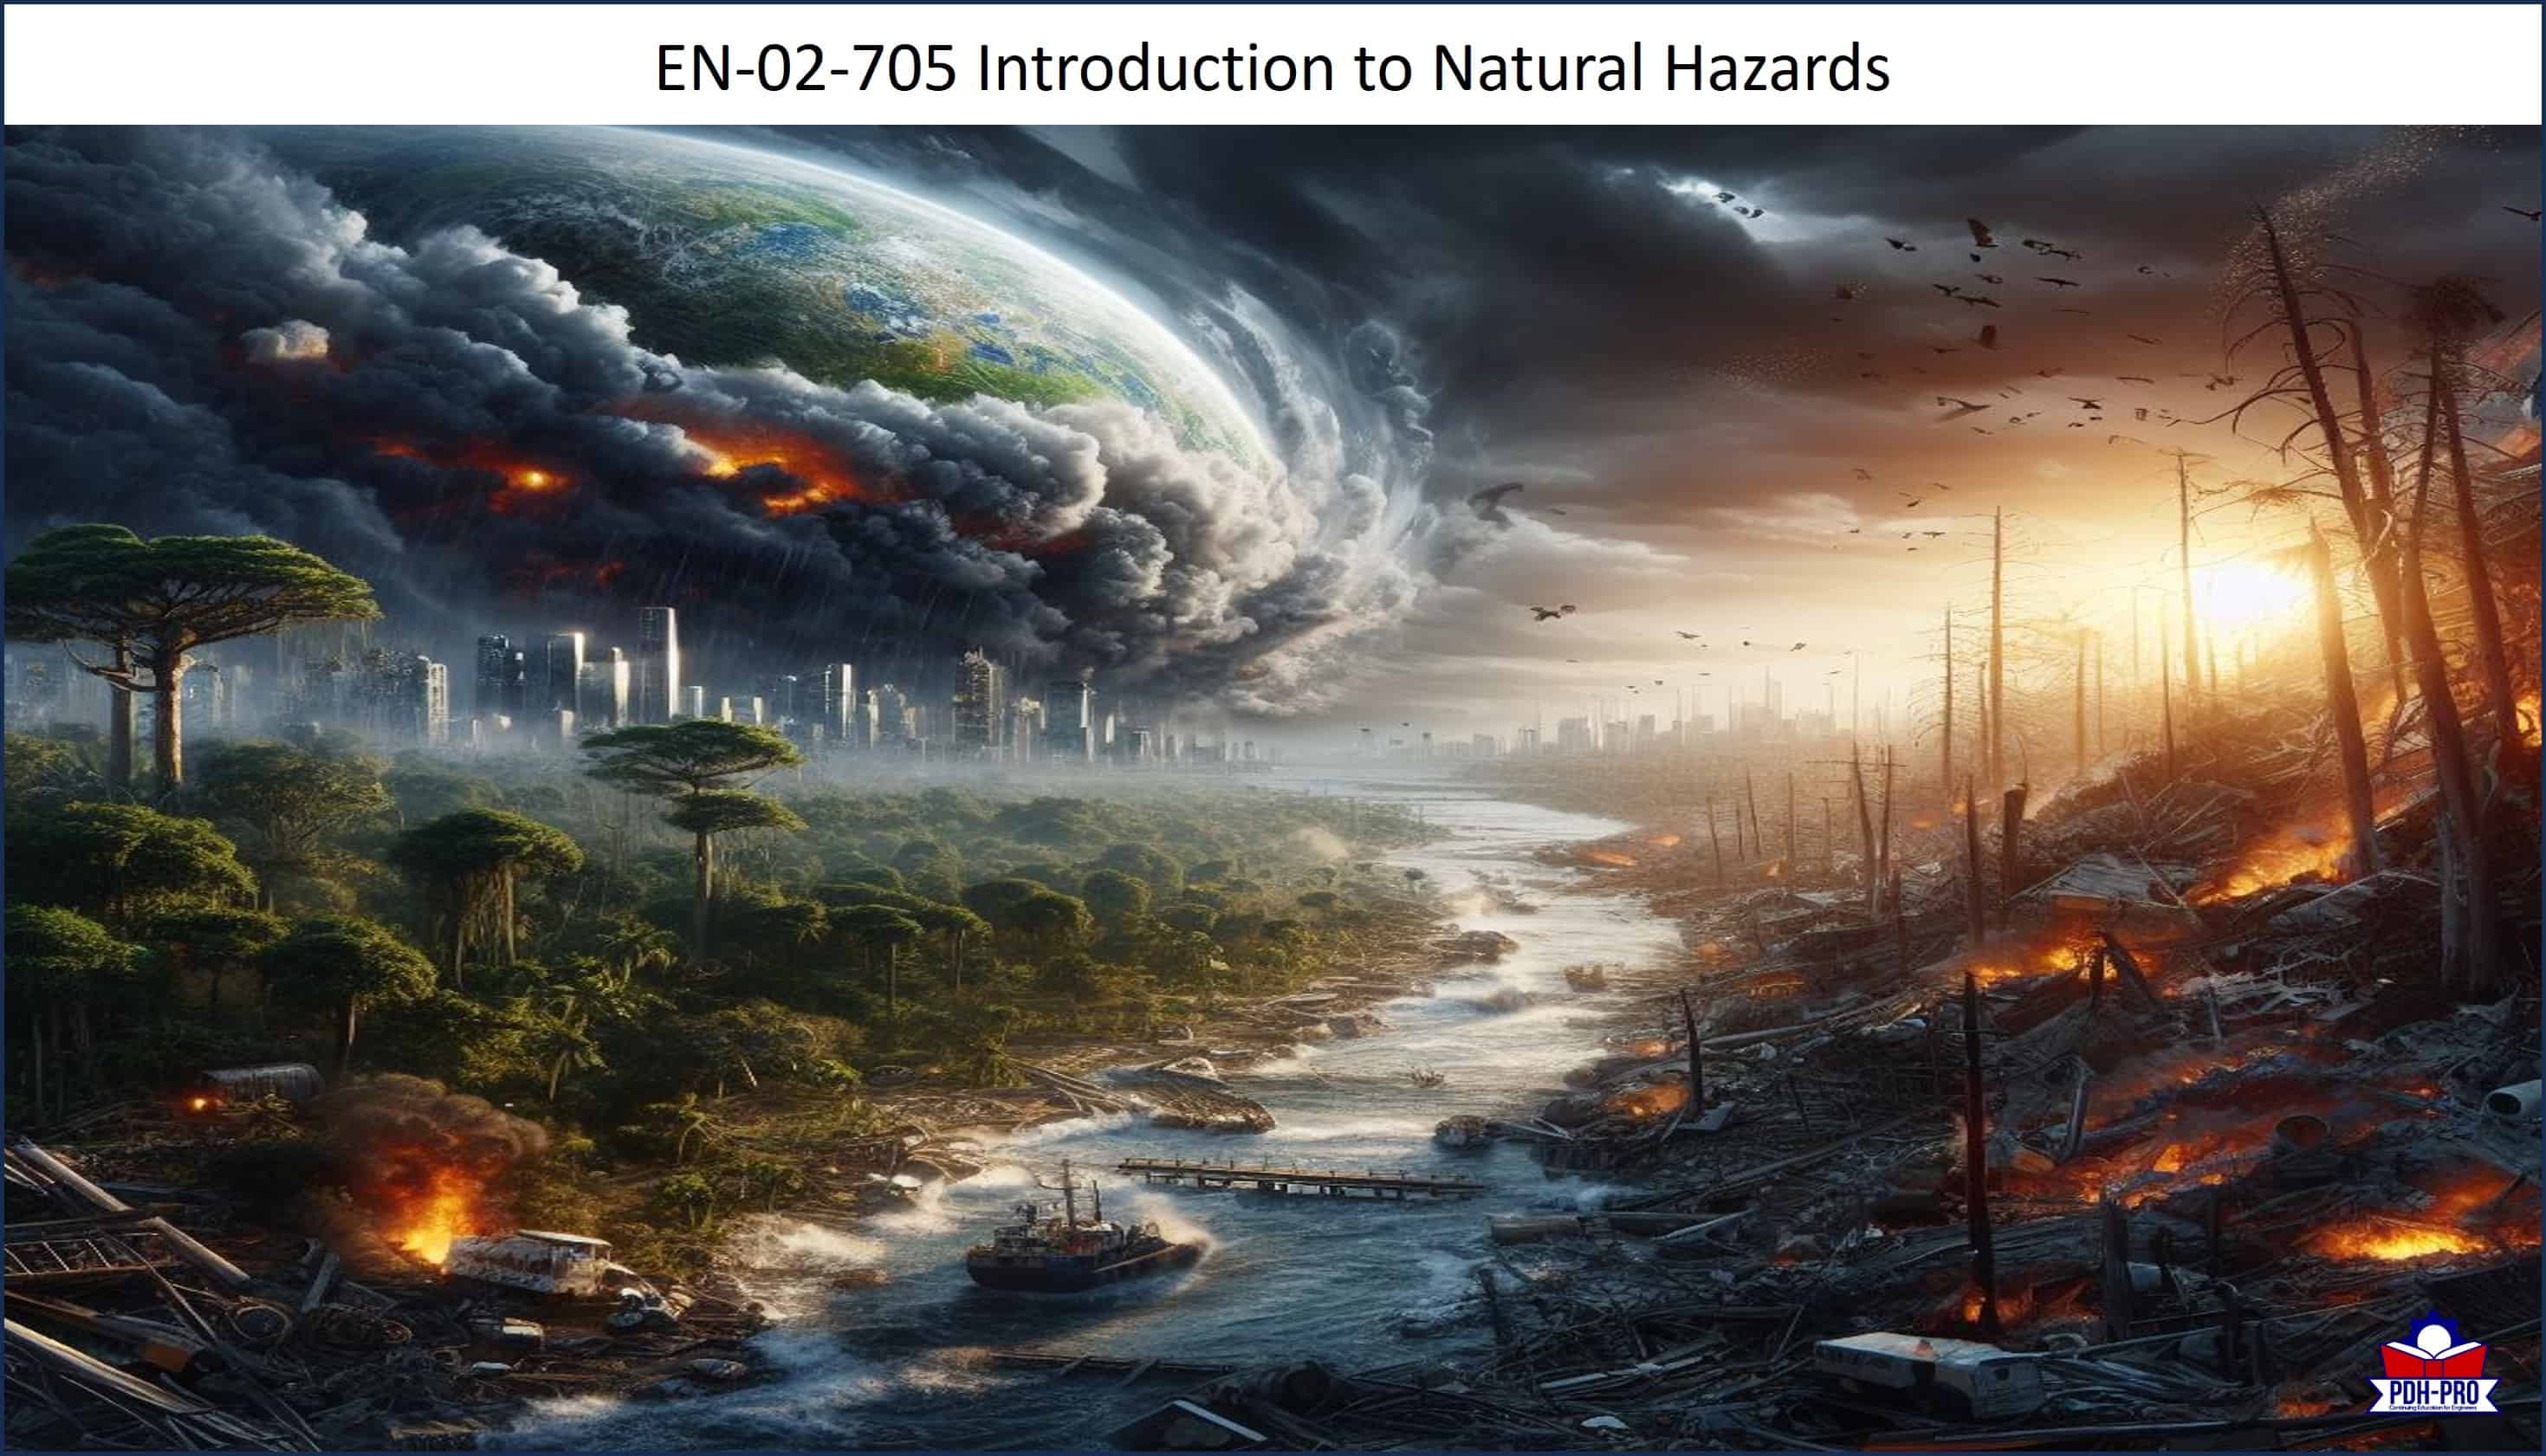 Introduction to Natural Hazards